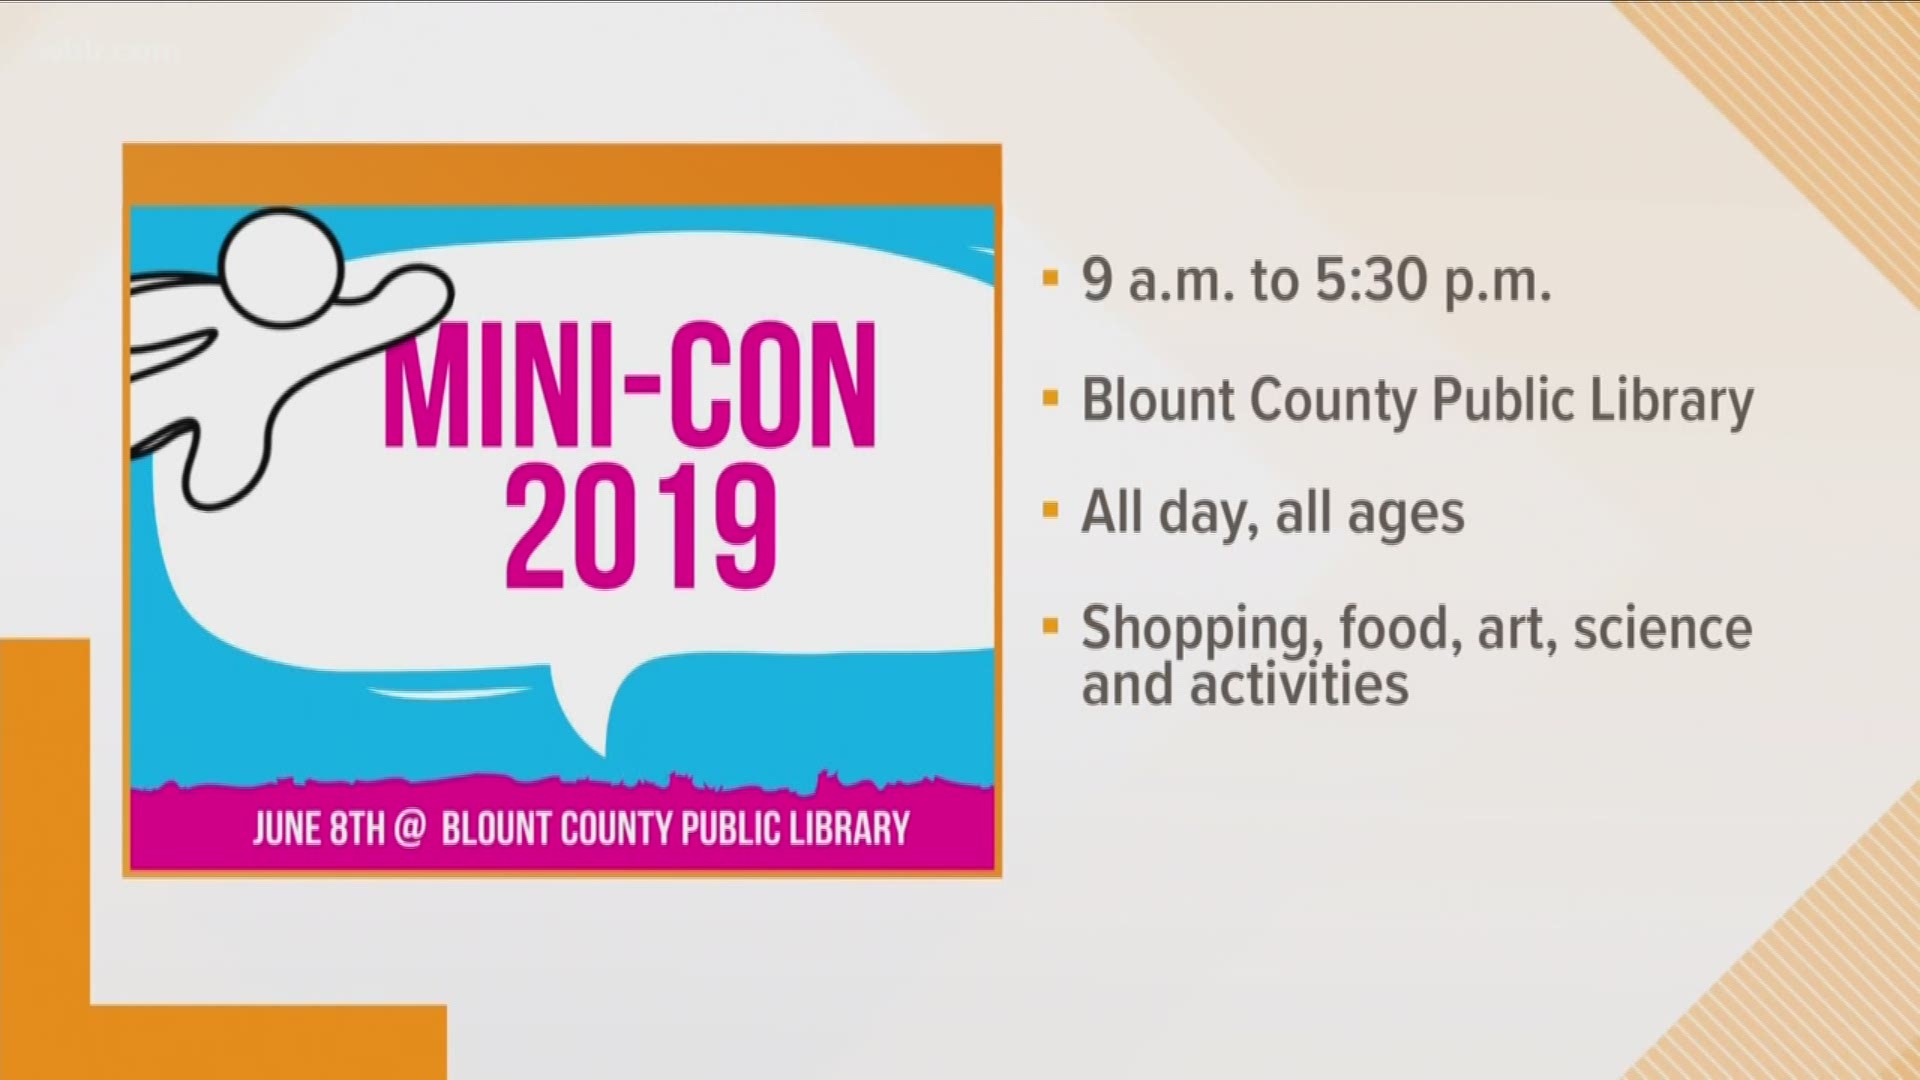 If you're looking for something fun to do with the family Saturday, you can bring them to Blount County Public Library for Mini Con. Jennifer Spirko came from the library to talk about the friendly neighborhood comic convention.